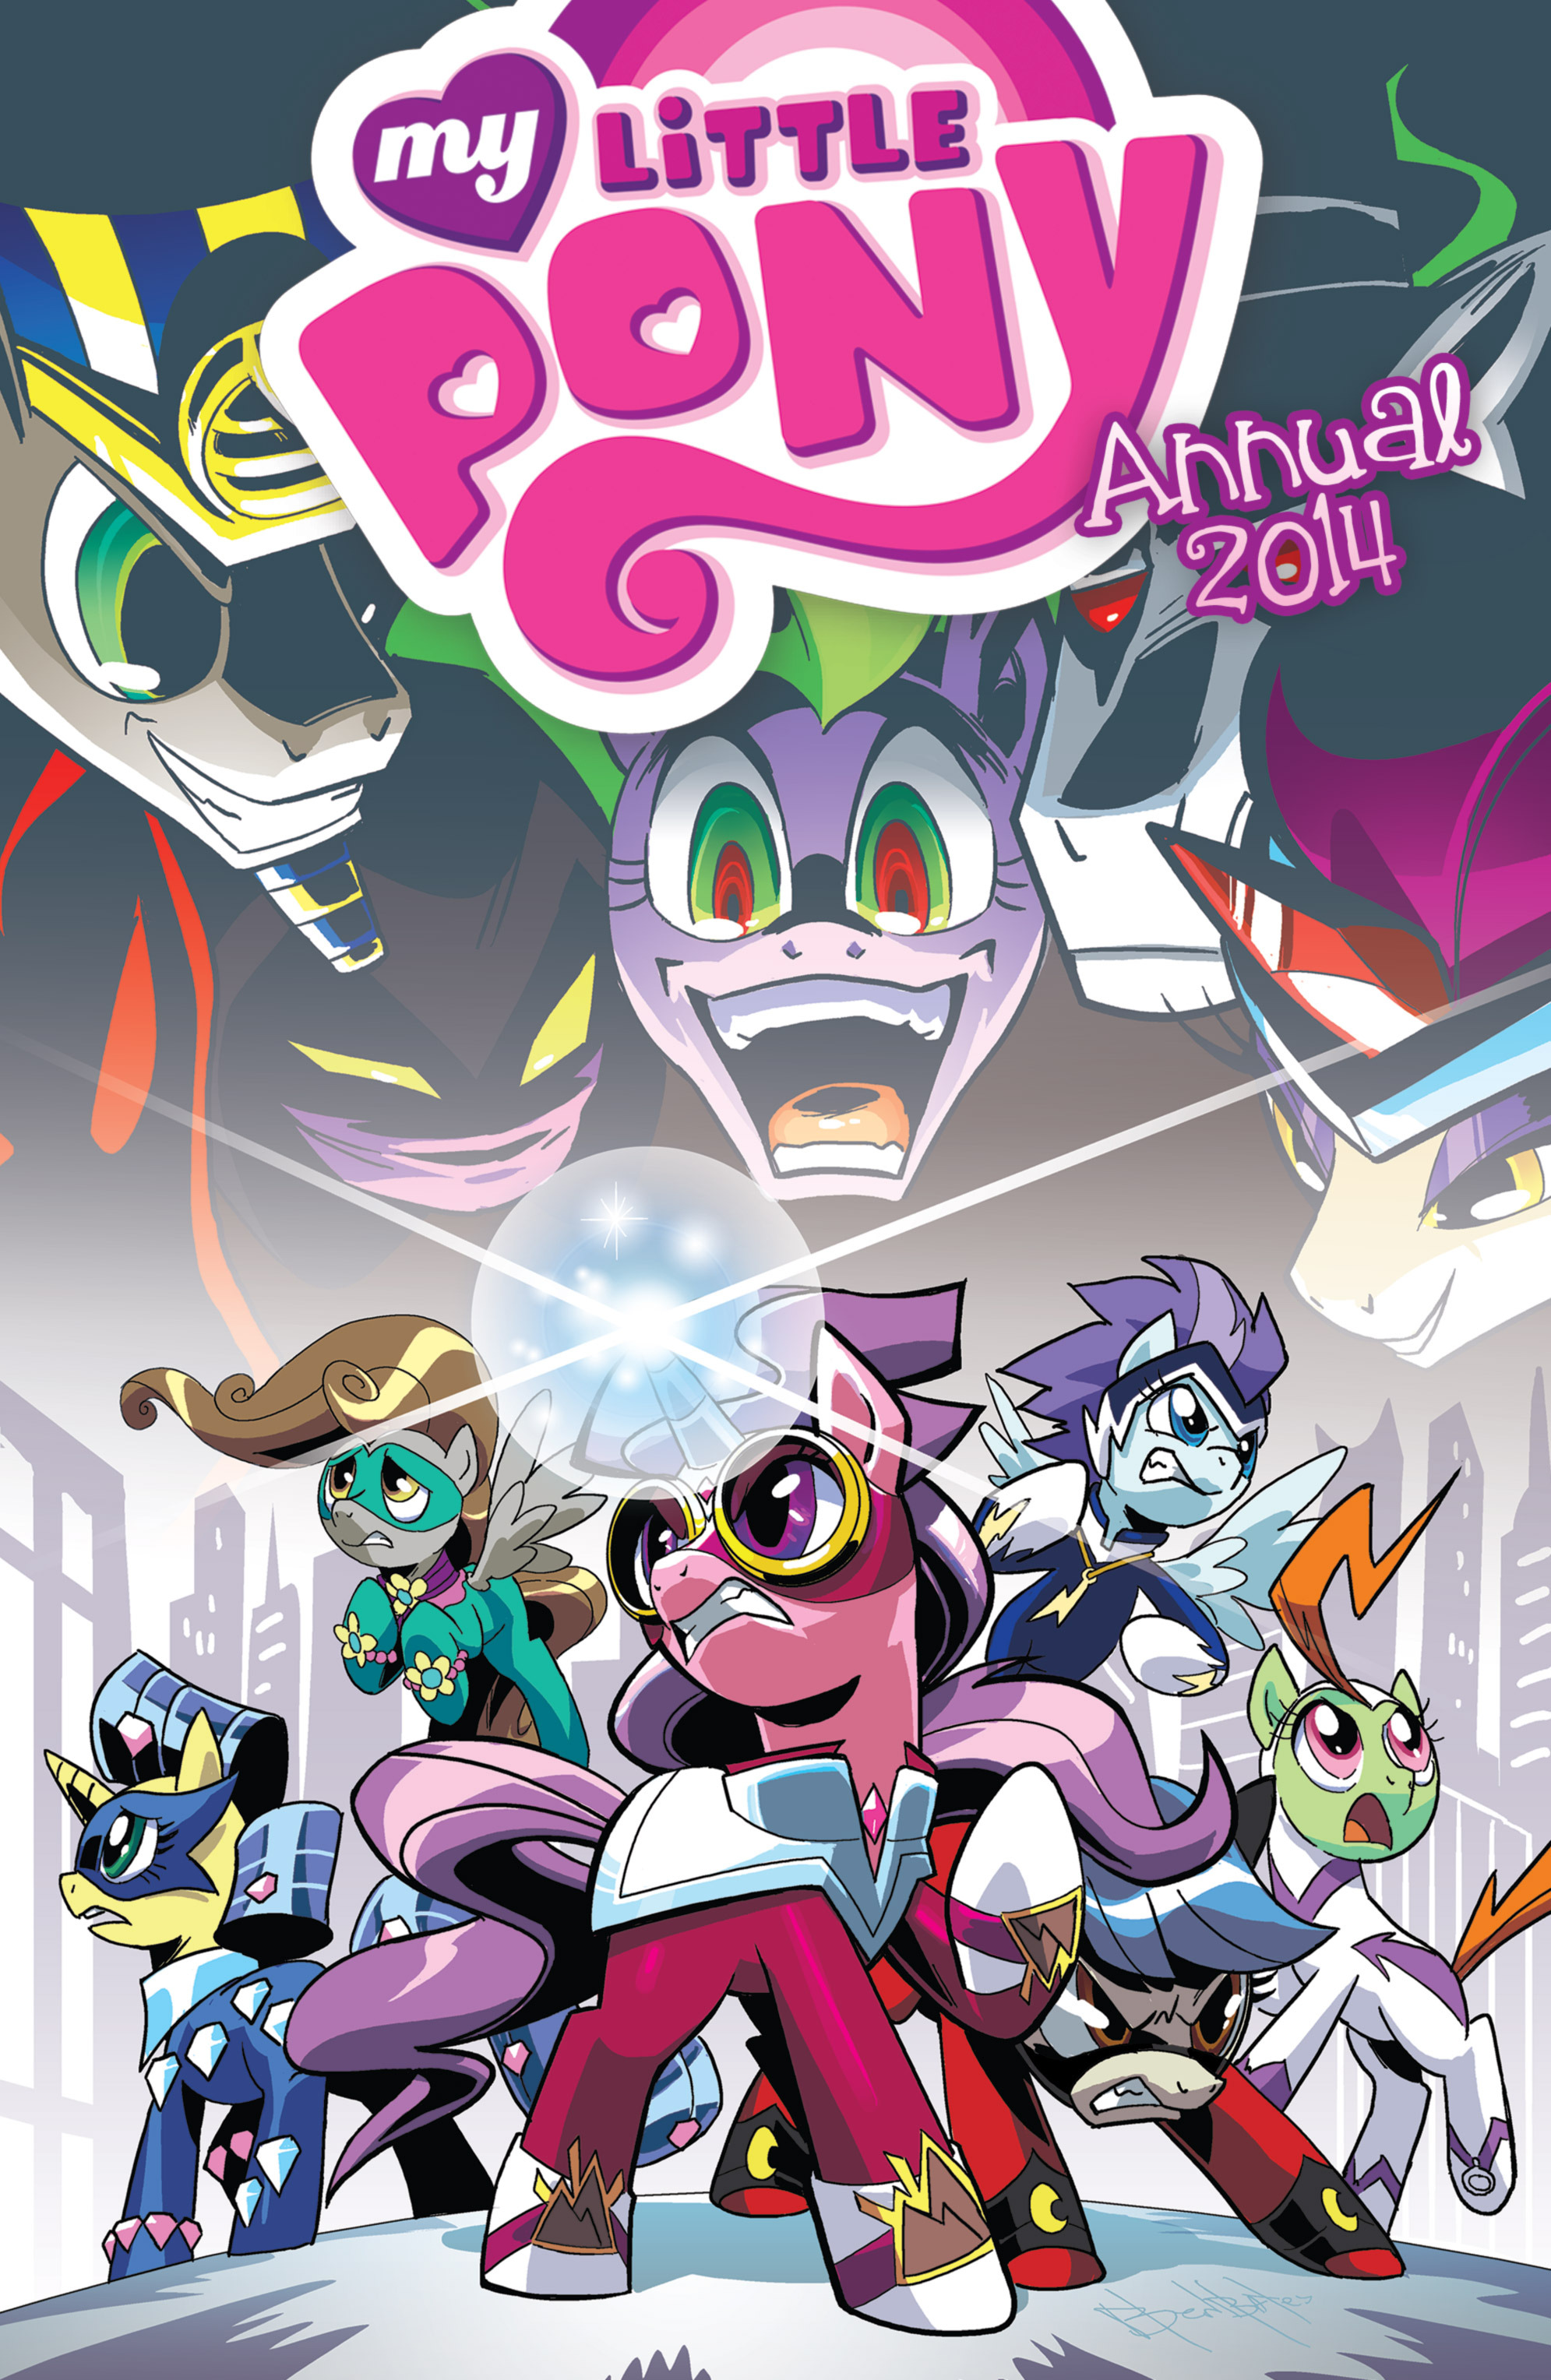 Read online My Little Pony Annual comic -  Issue # Annual 2014 - 1